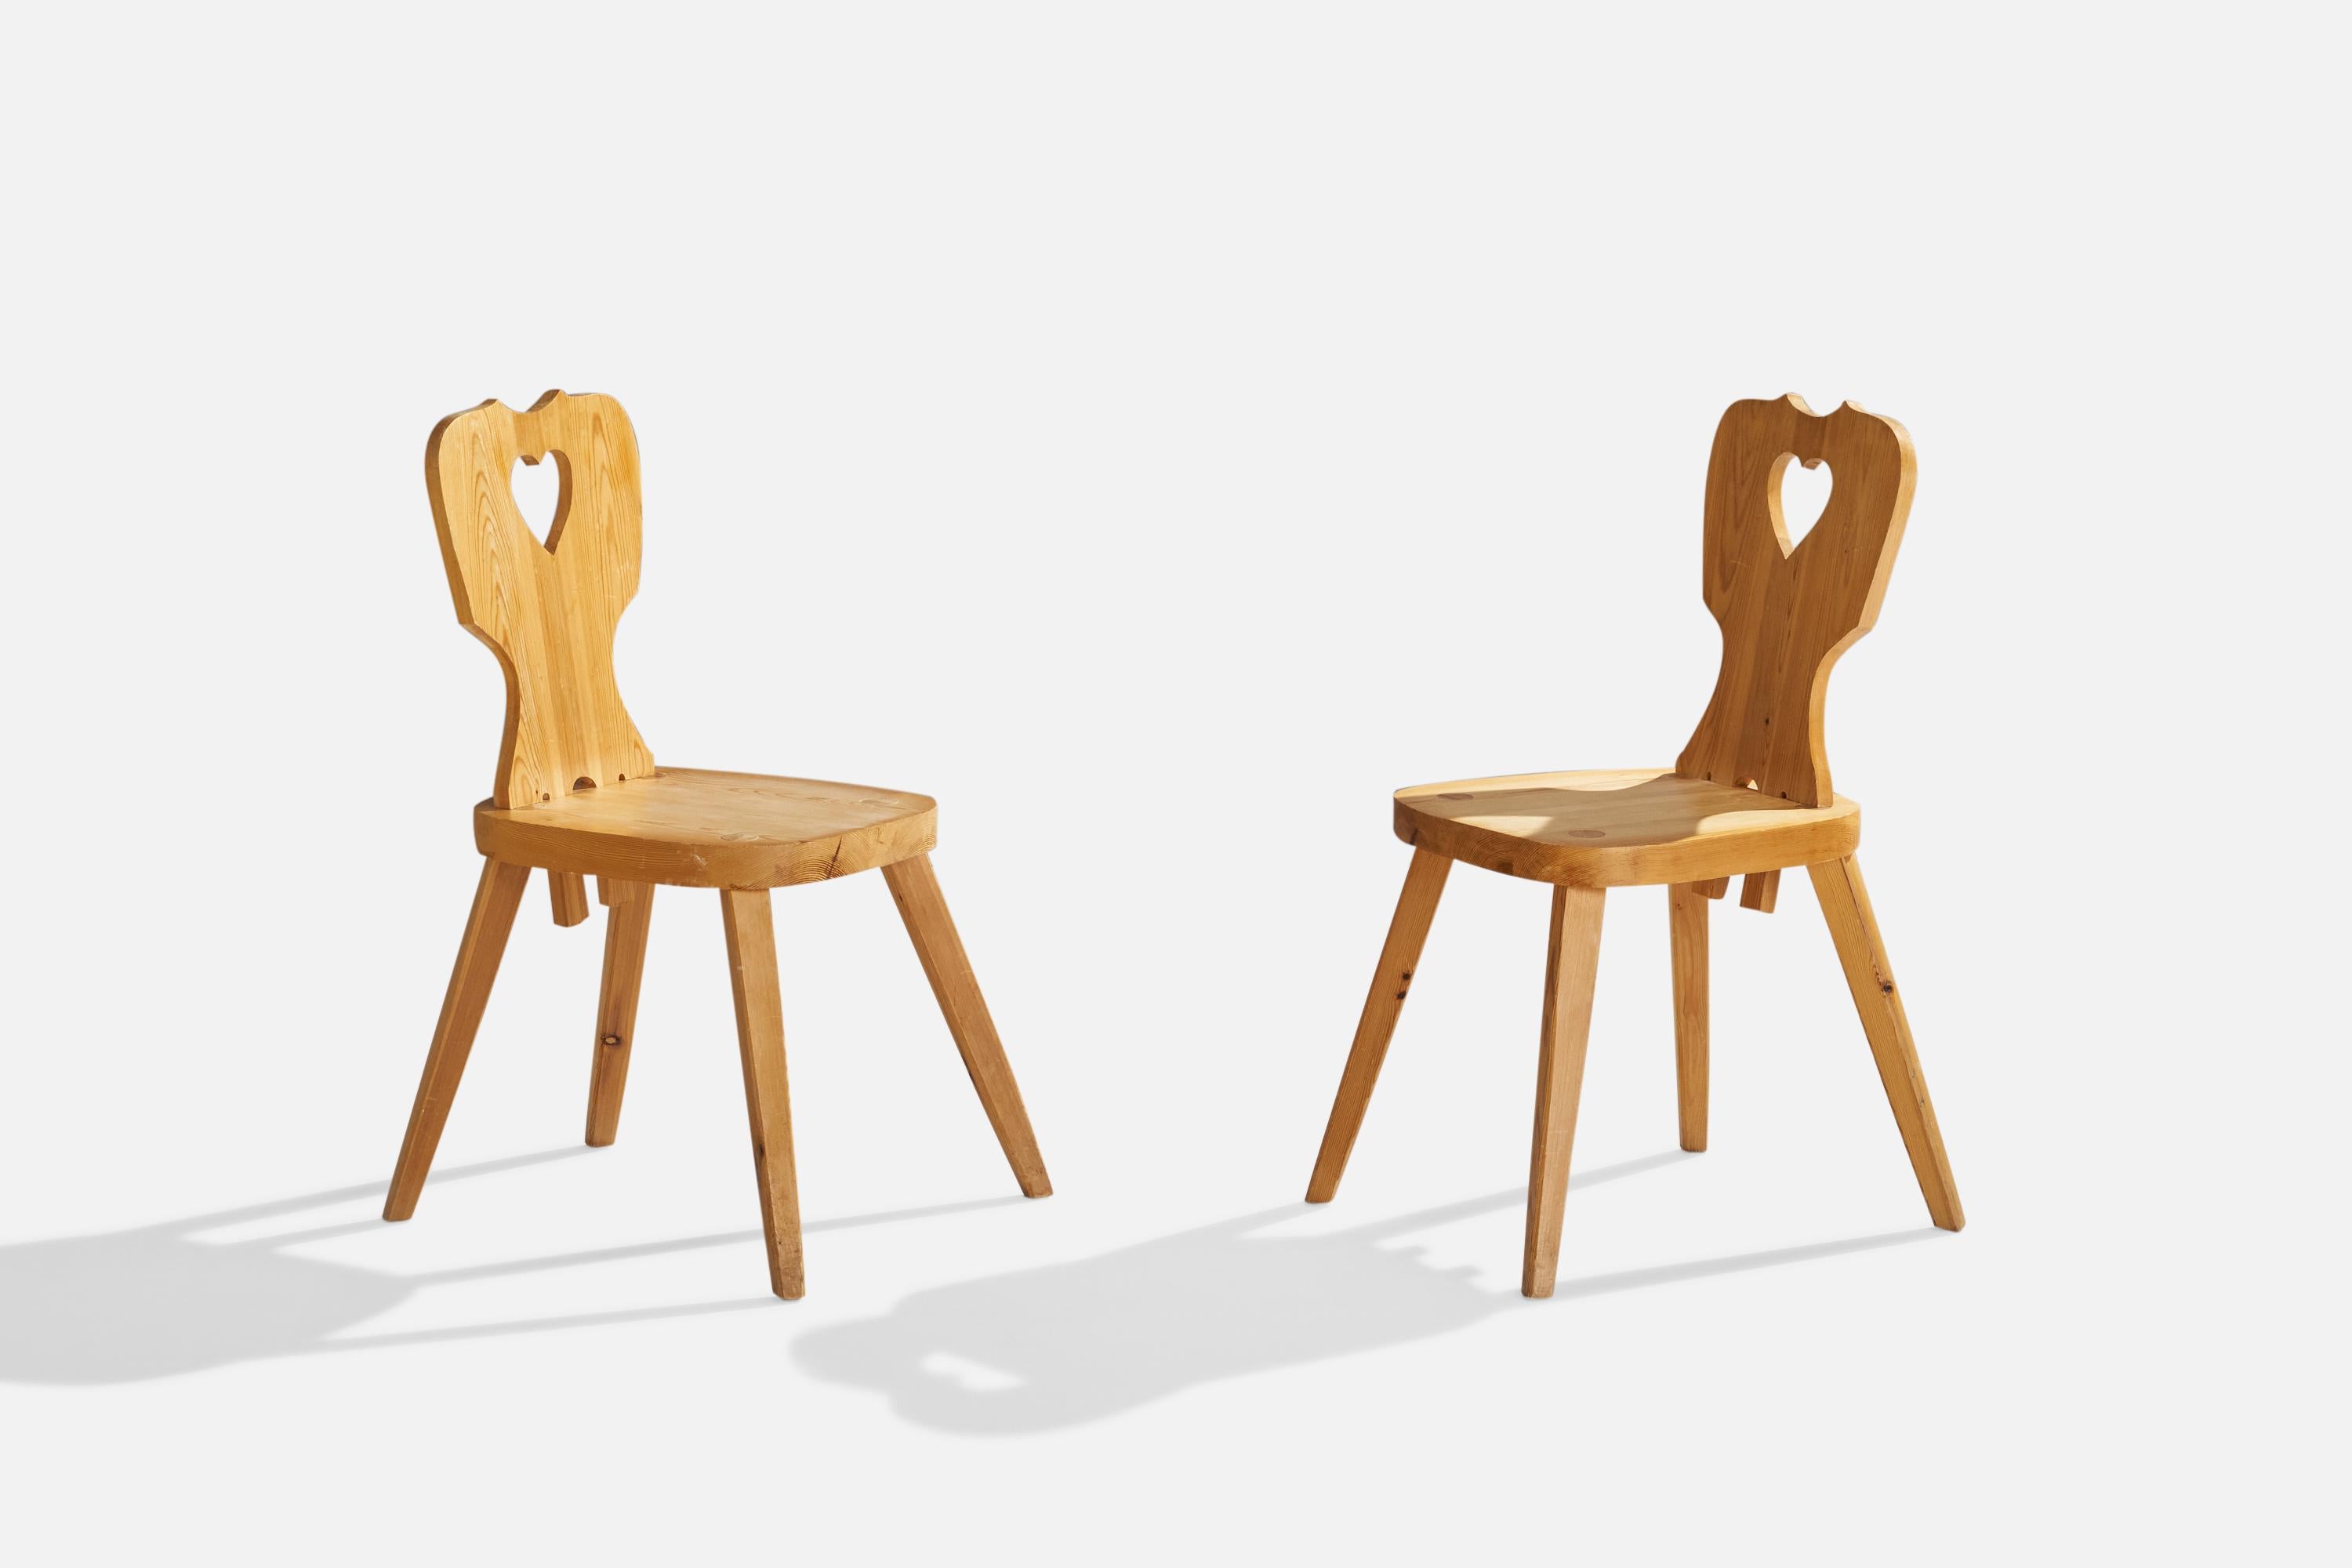 A pair of pine side chairs designed and produced in Sweden in 1977.

Seat height 17.5”